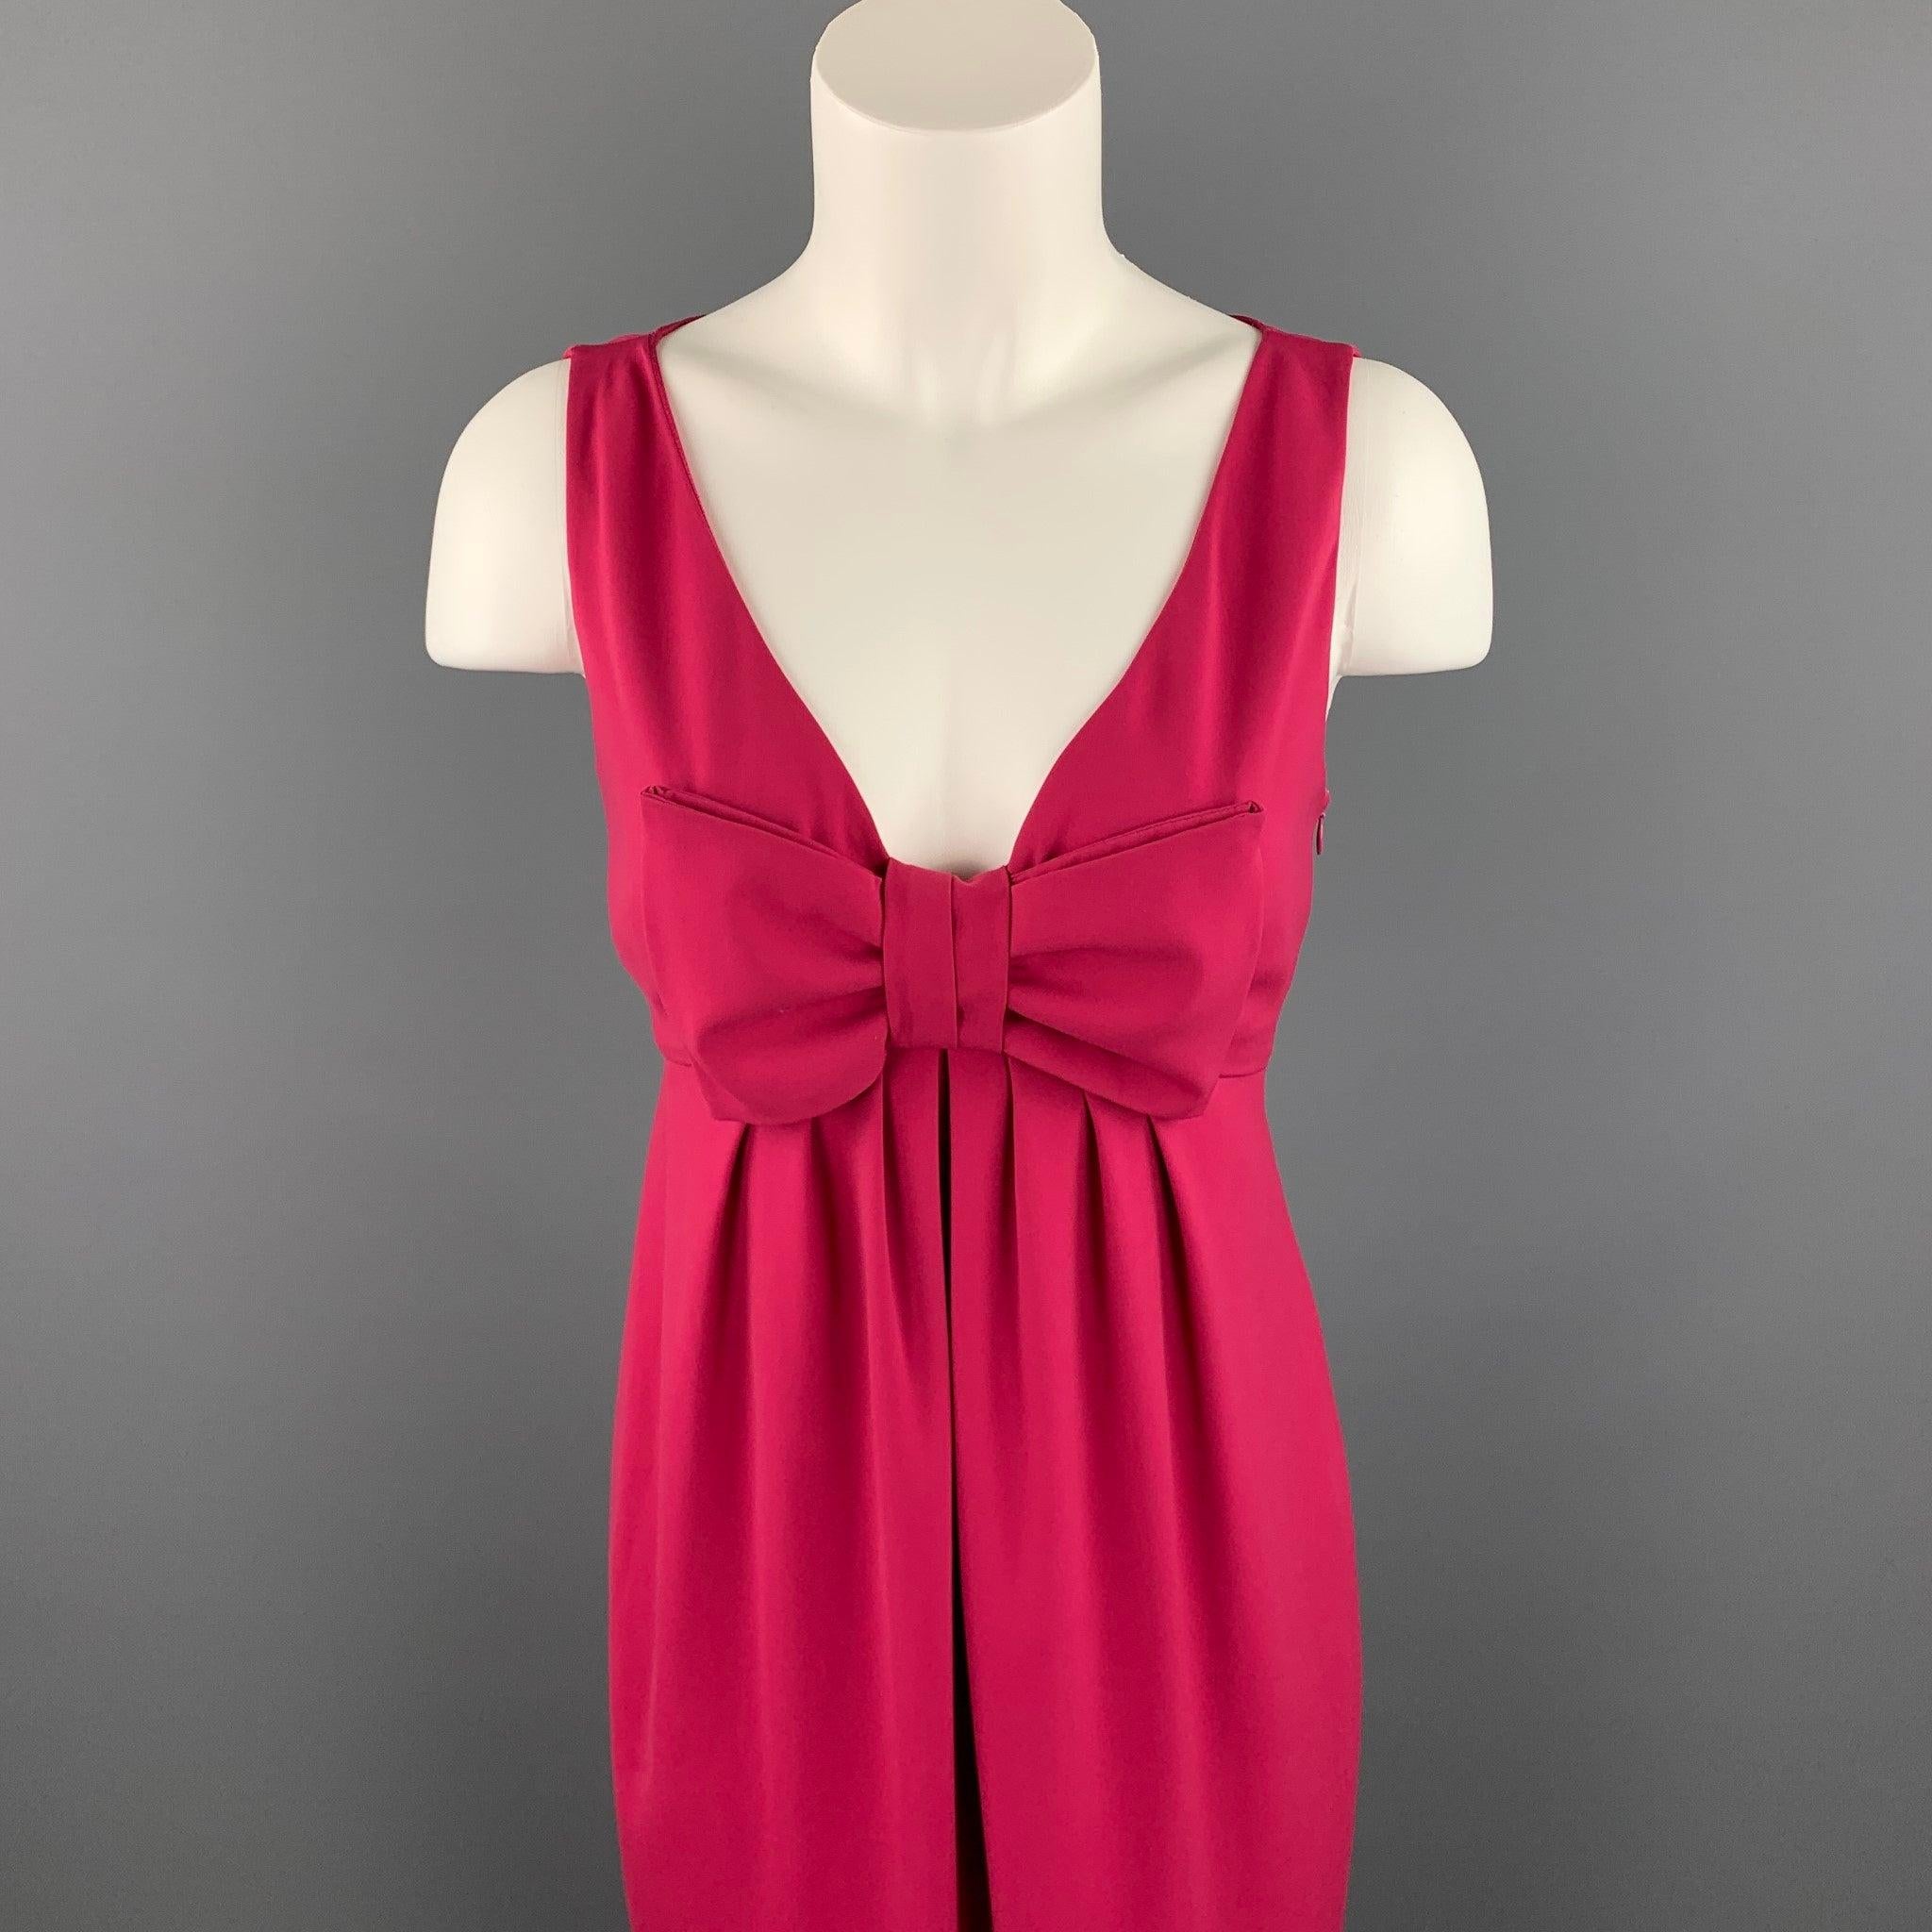 MOSCHINO cocktail dress comes in a fuchsia polyester featuring an empire waist, v-neck, front bow detail, and a side zipper closure.Very Good
Pre-Owned Condition. 

Marked:  8 

Measurements: 
 
Shoulder: 12.5 inches 
Bust: 16 inches 
Waist: 29